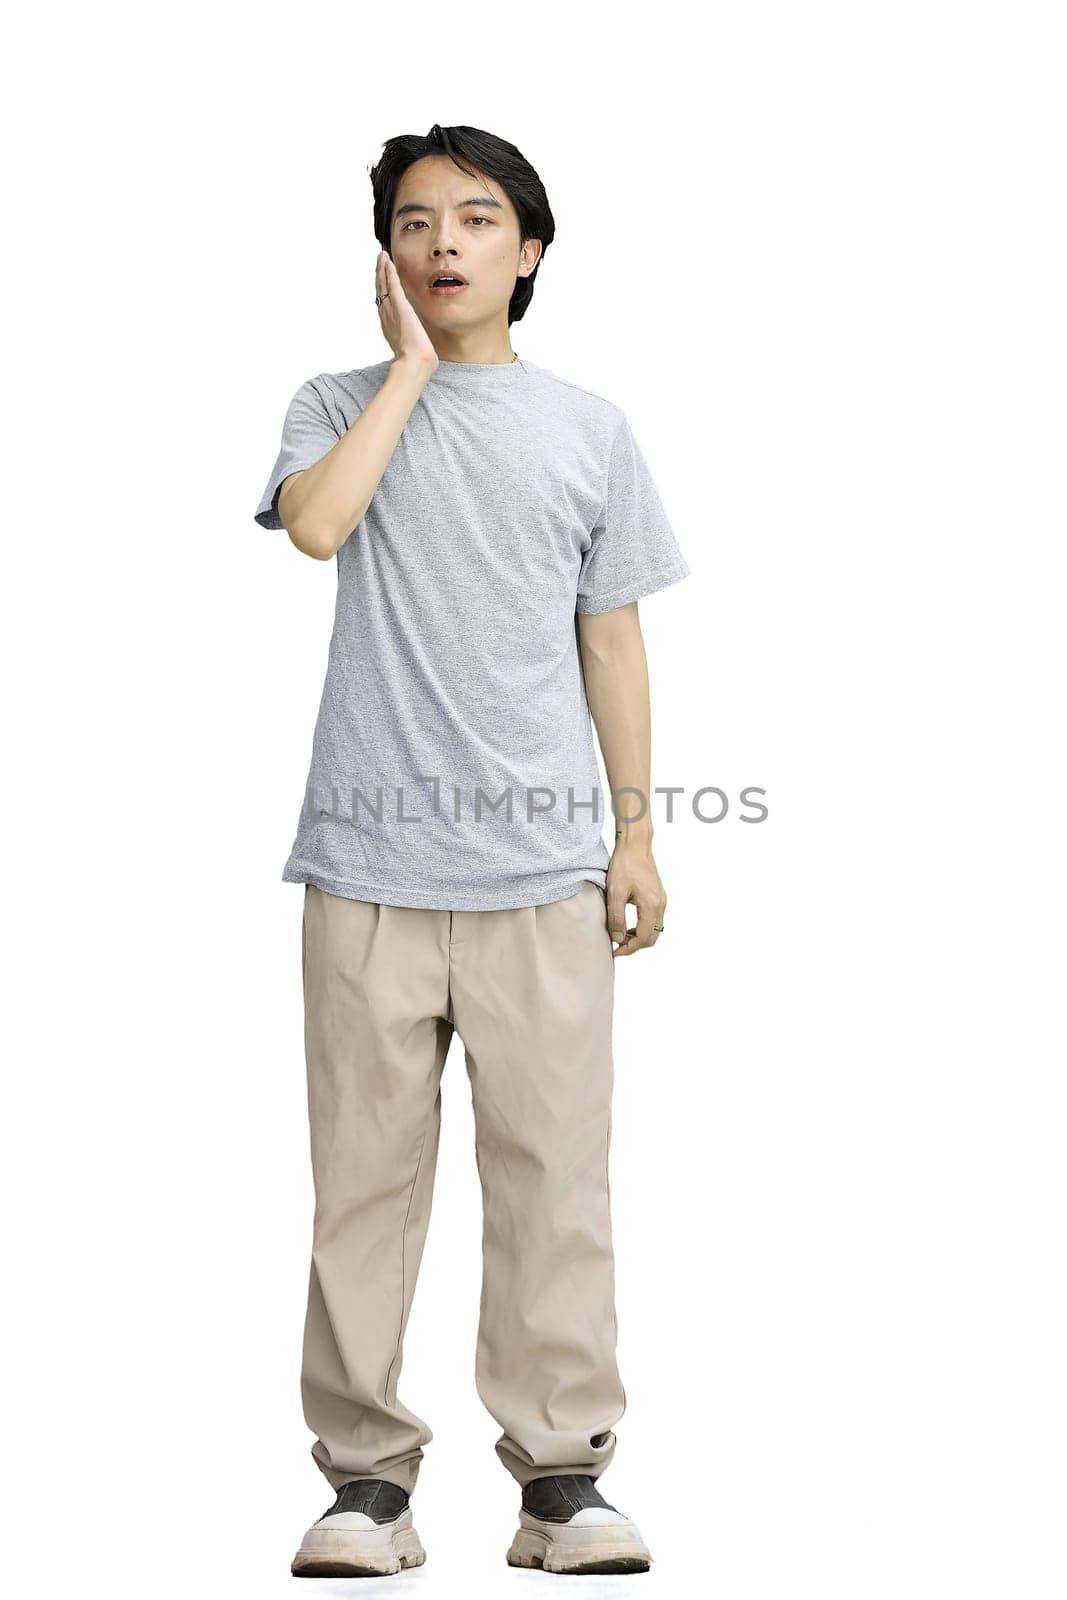 A guy in a gray T-shirt, on a white background, in full height, yawns.